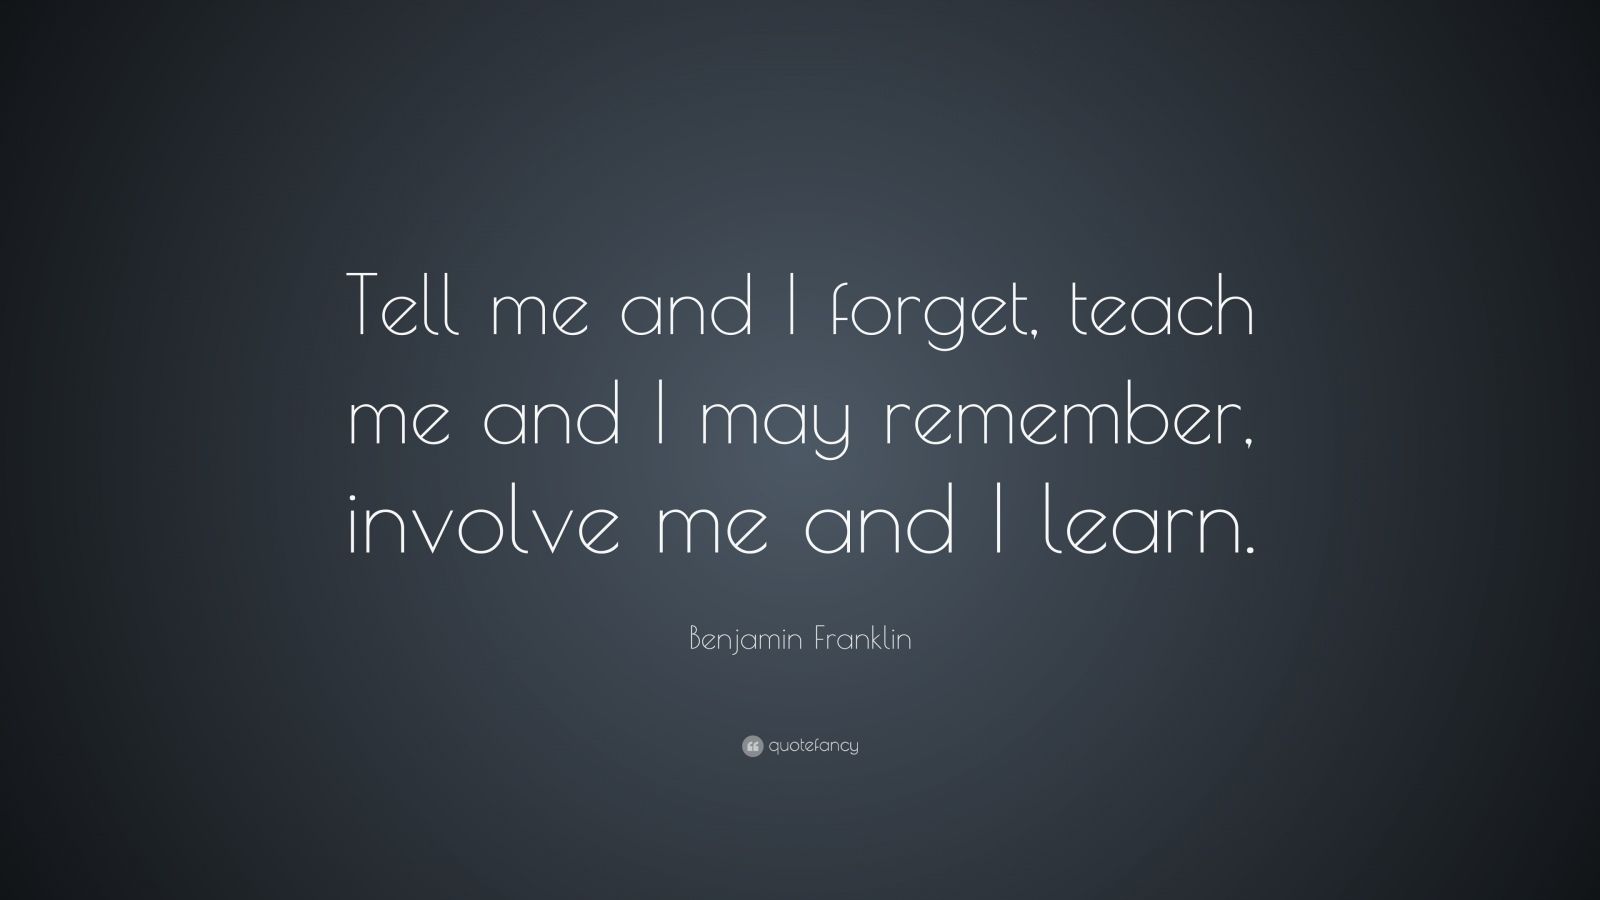 Benjamin Franklin Quote: “Tell me and I forget, teach me and I may